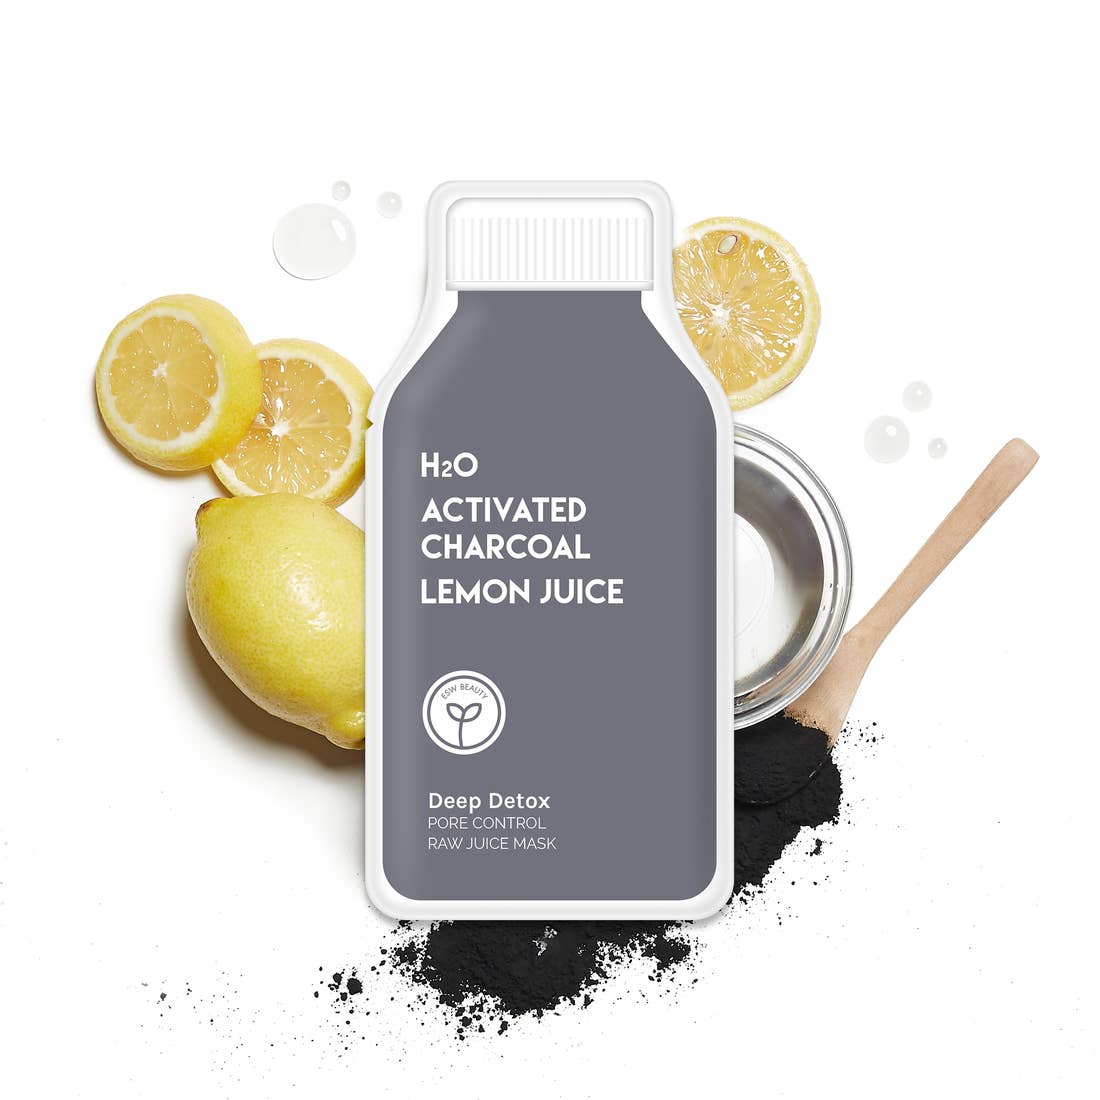 Activated charcoal face sheet mask